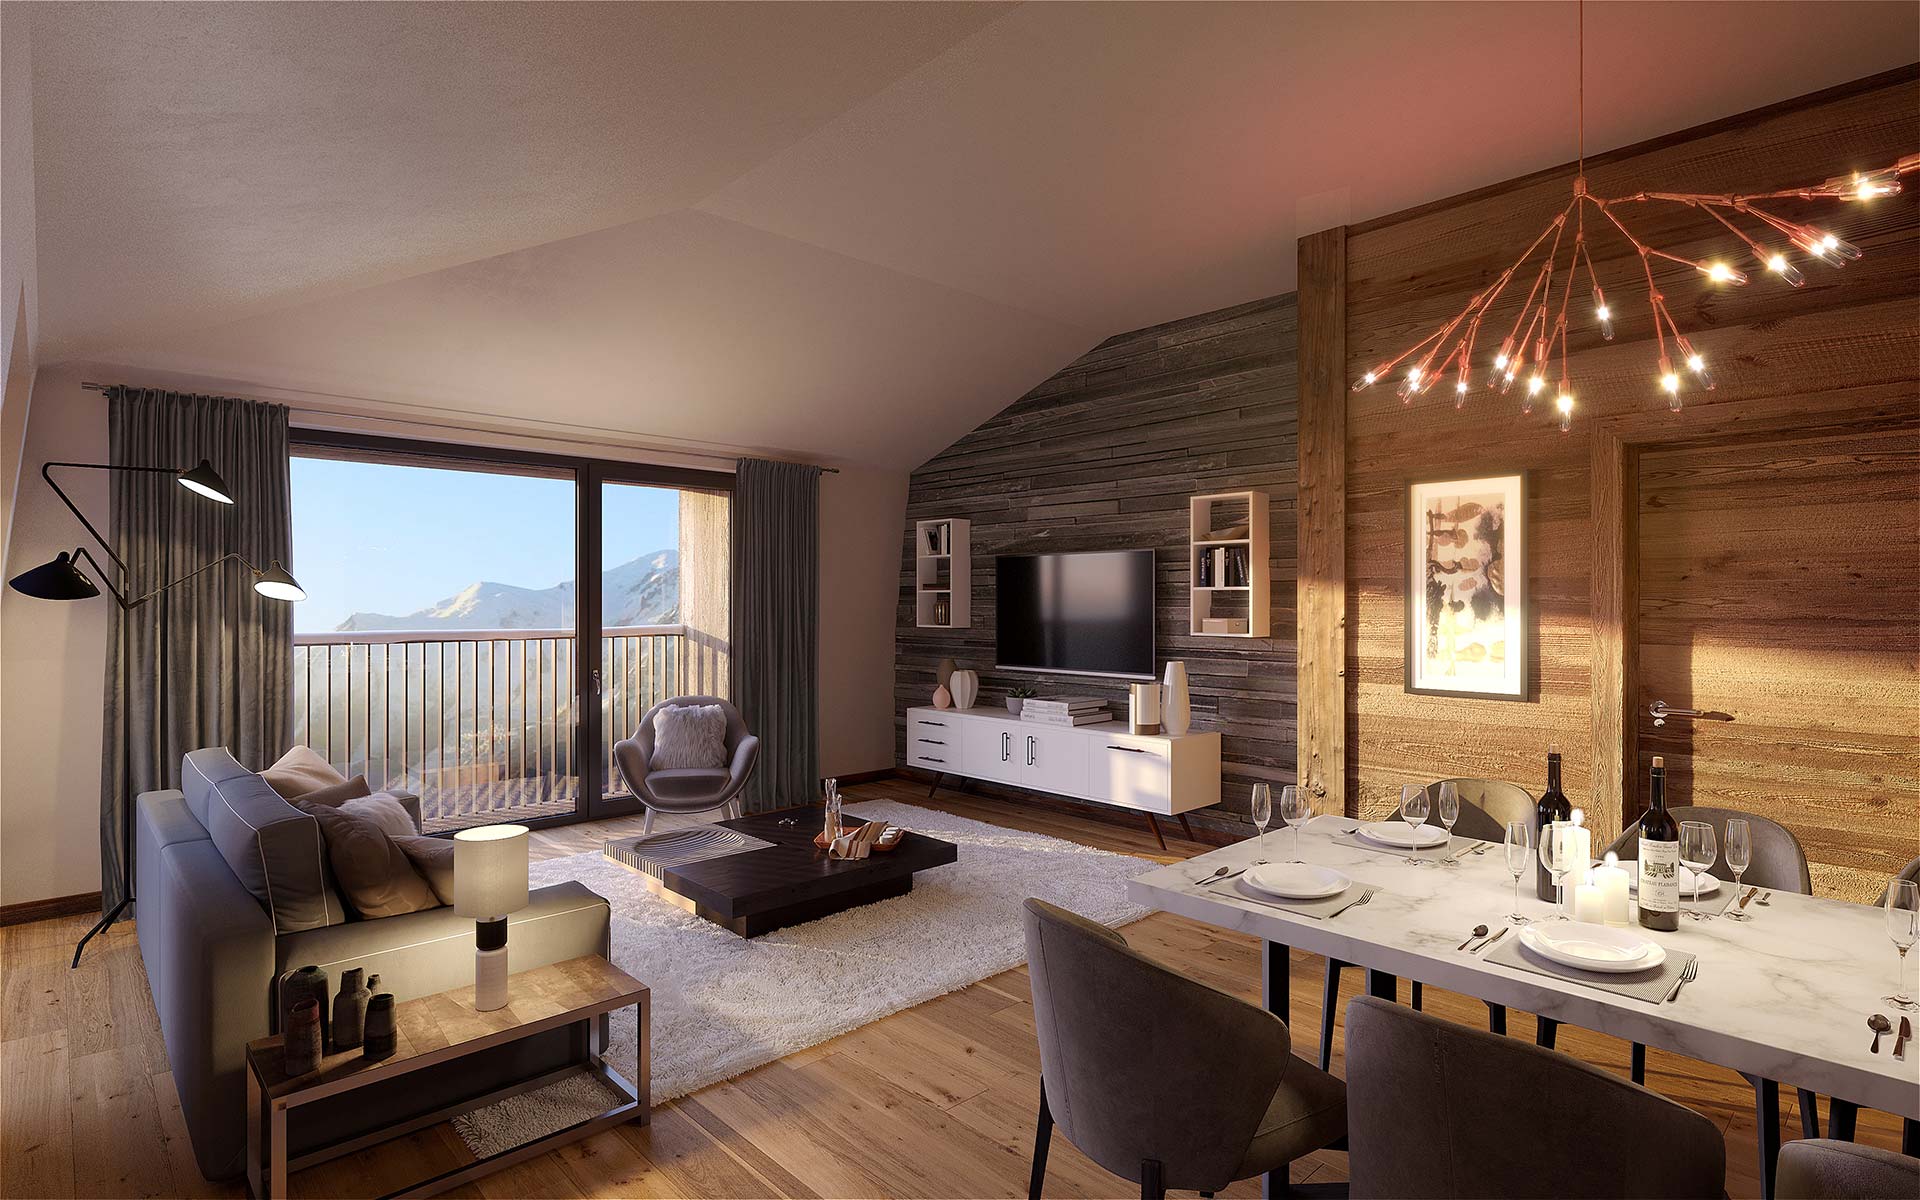 Luxury interior living-room for a new apartment in Chamonix